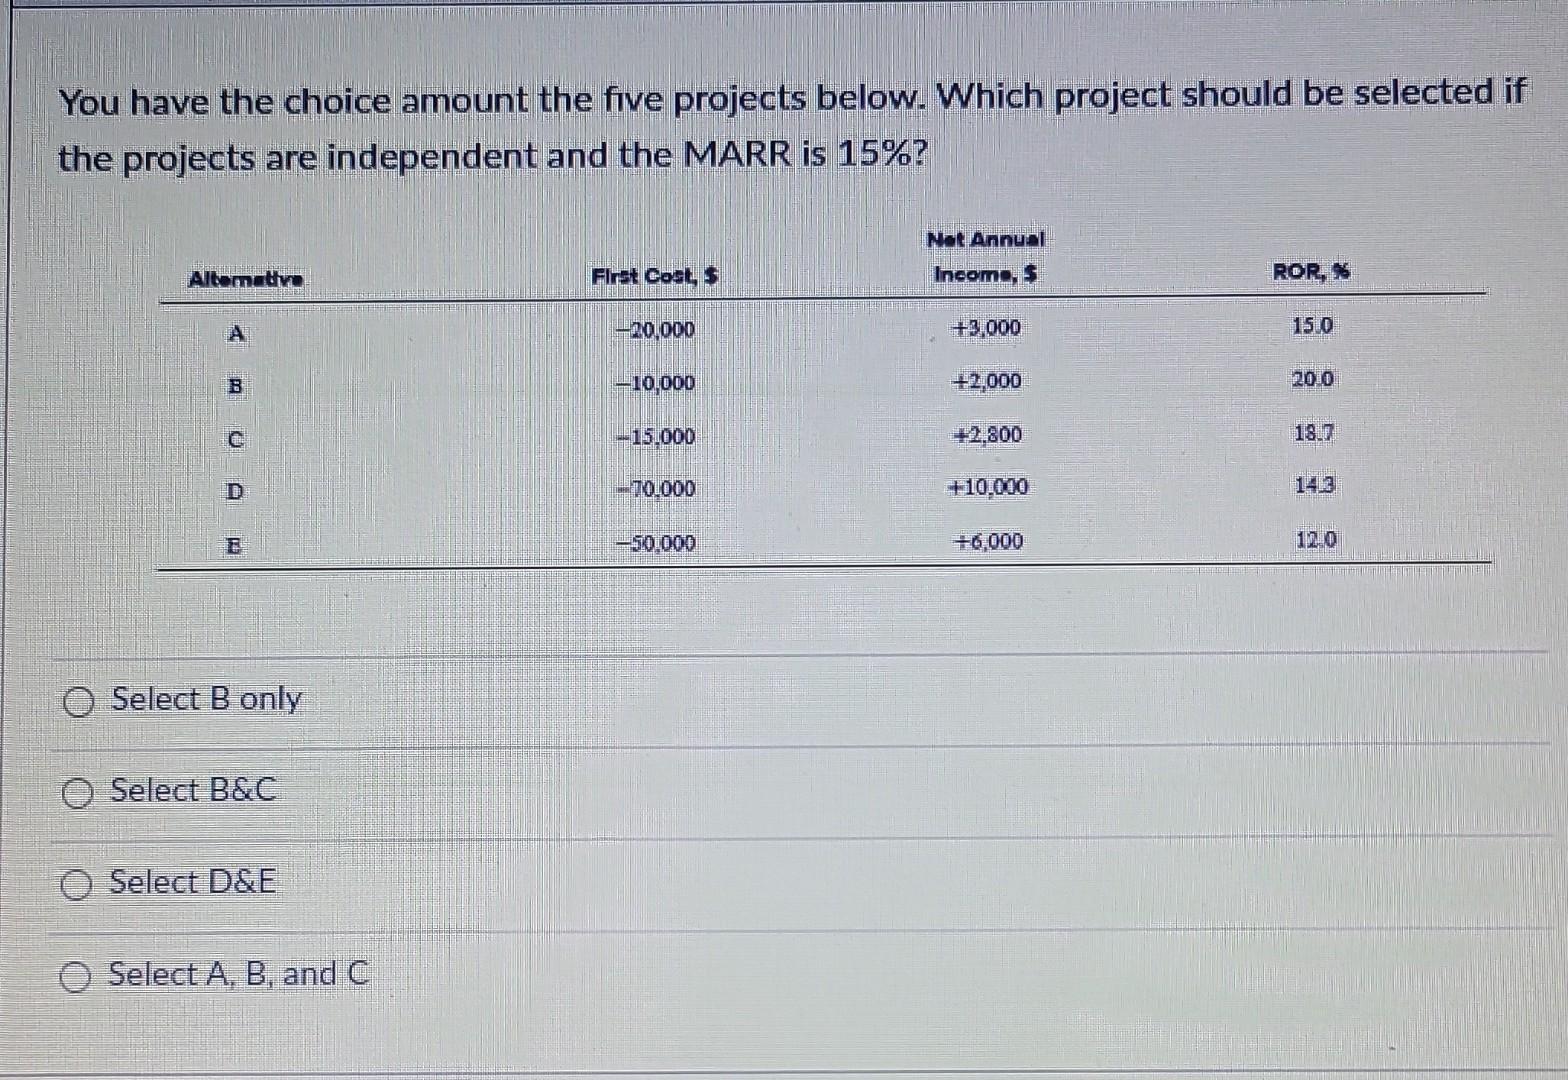 You have the choice amount the five projects below. Which project should be selected if the projects are independent and the